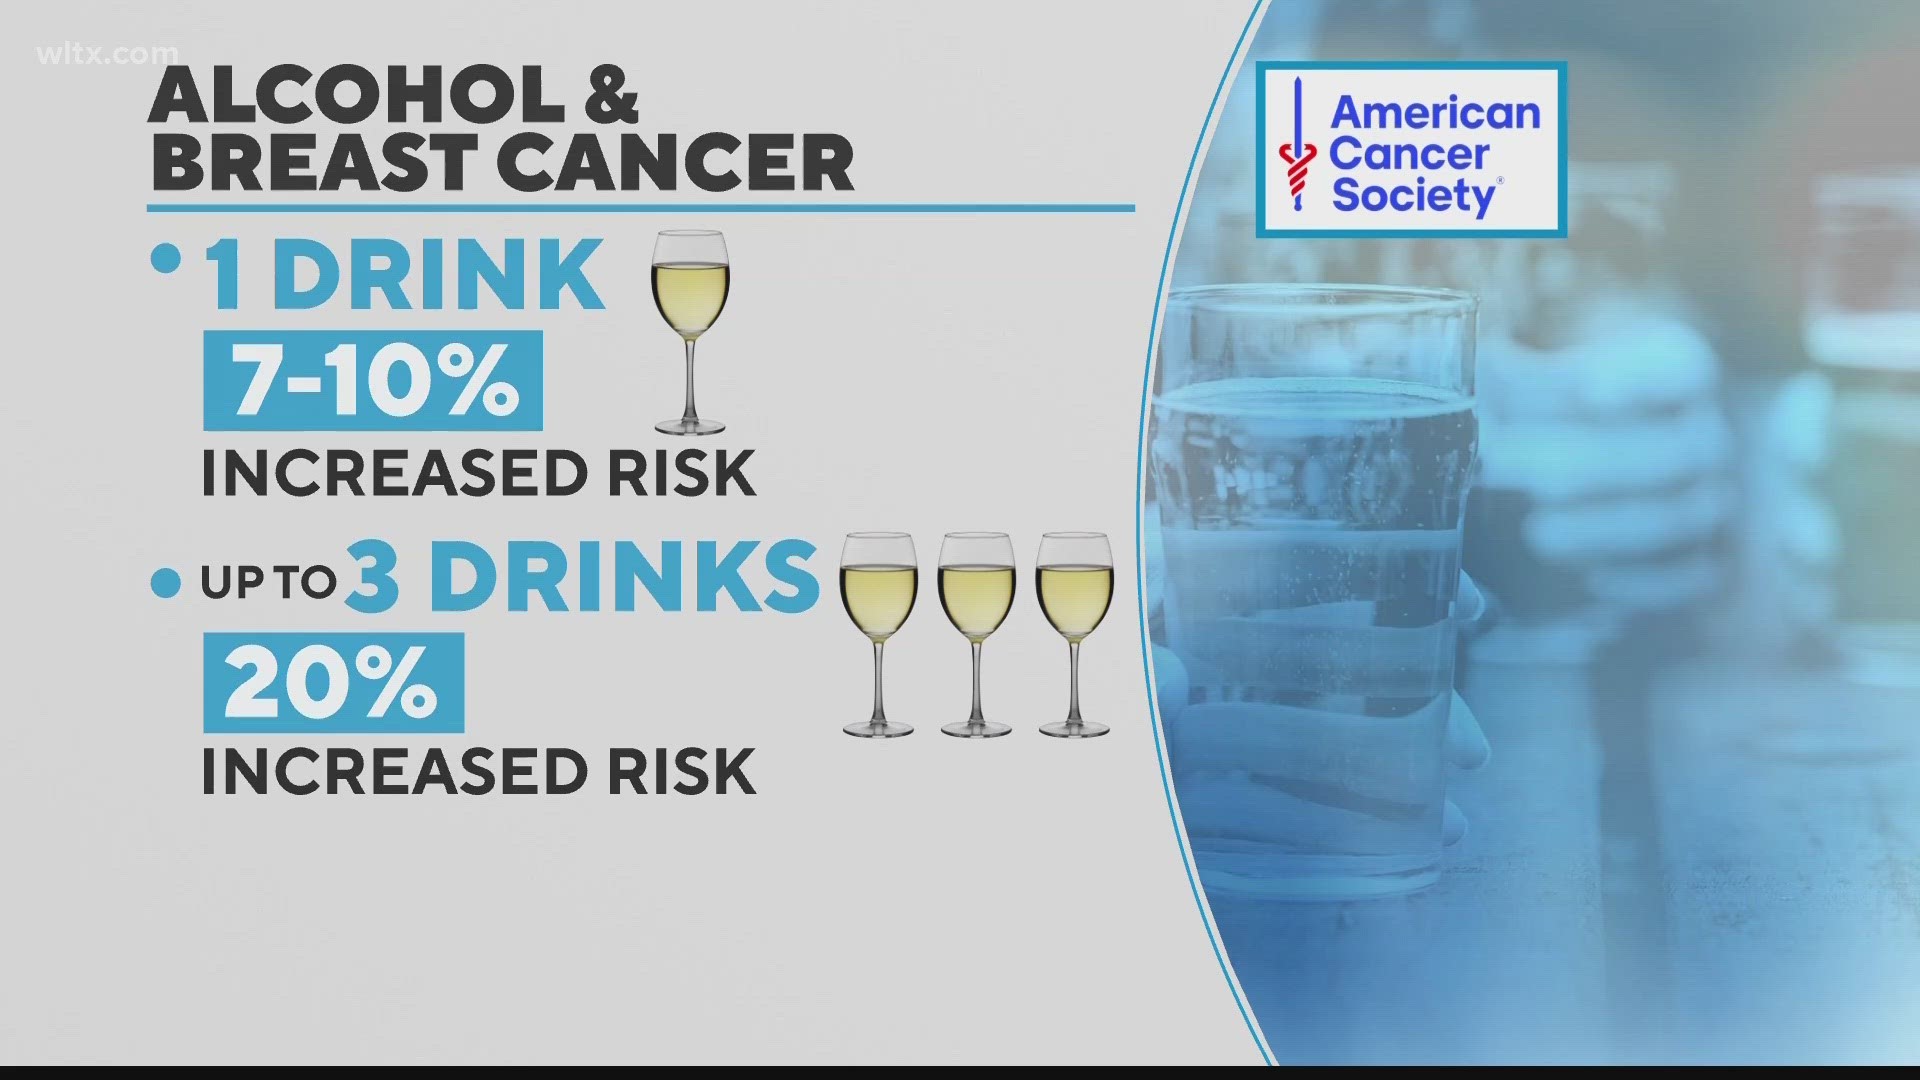 According to the American Cancer Society, having one drink a day increases the risk of of developing the cancer by 7-10%. And the risk increases to 20% with up to th